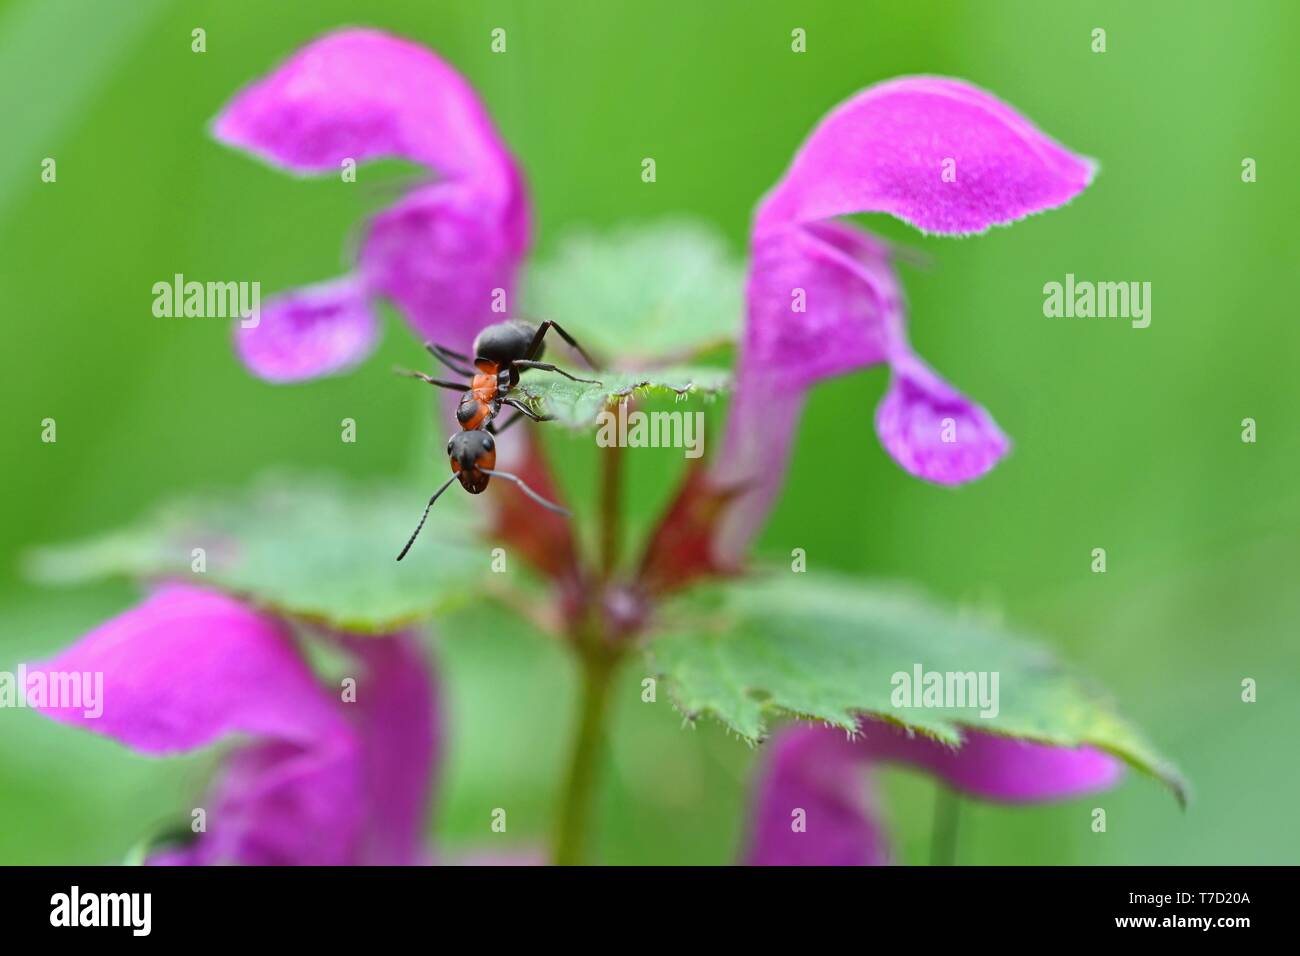 Beautiful macro shot of ant on leaf in grass. Natural colorful background. Stock Photo